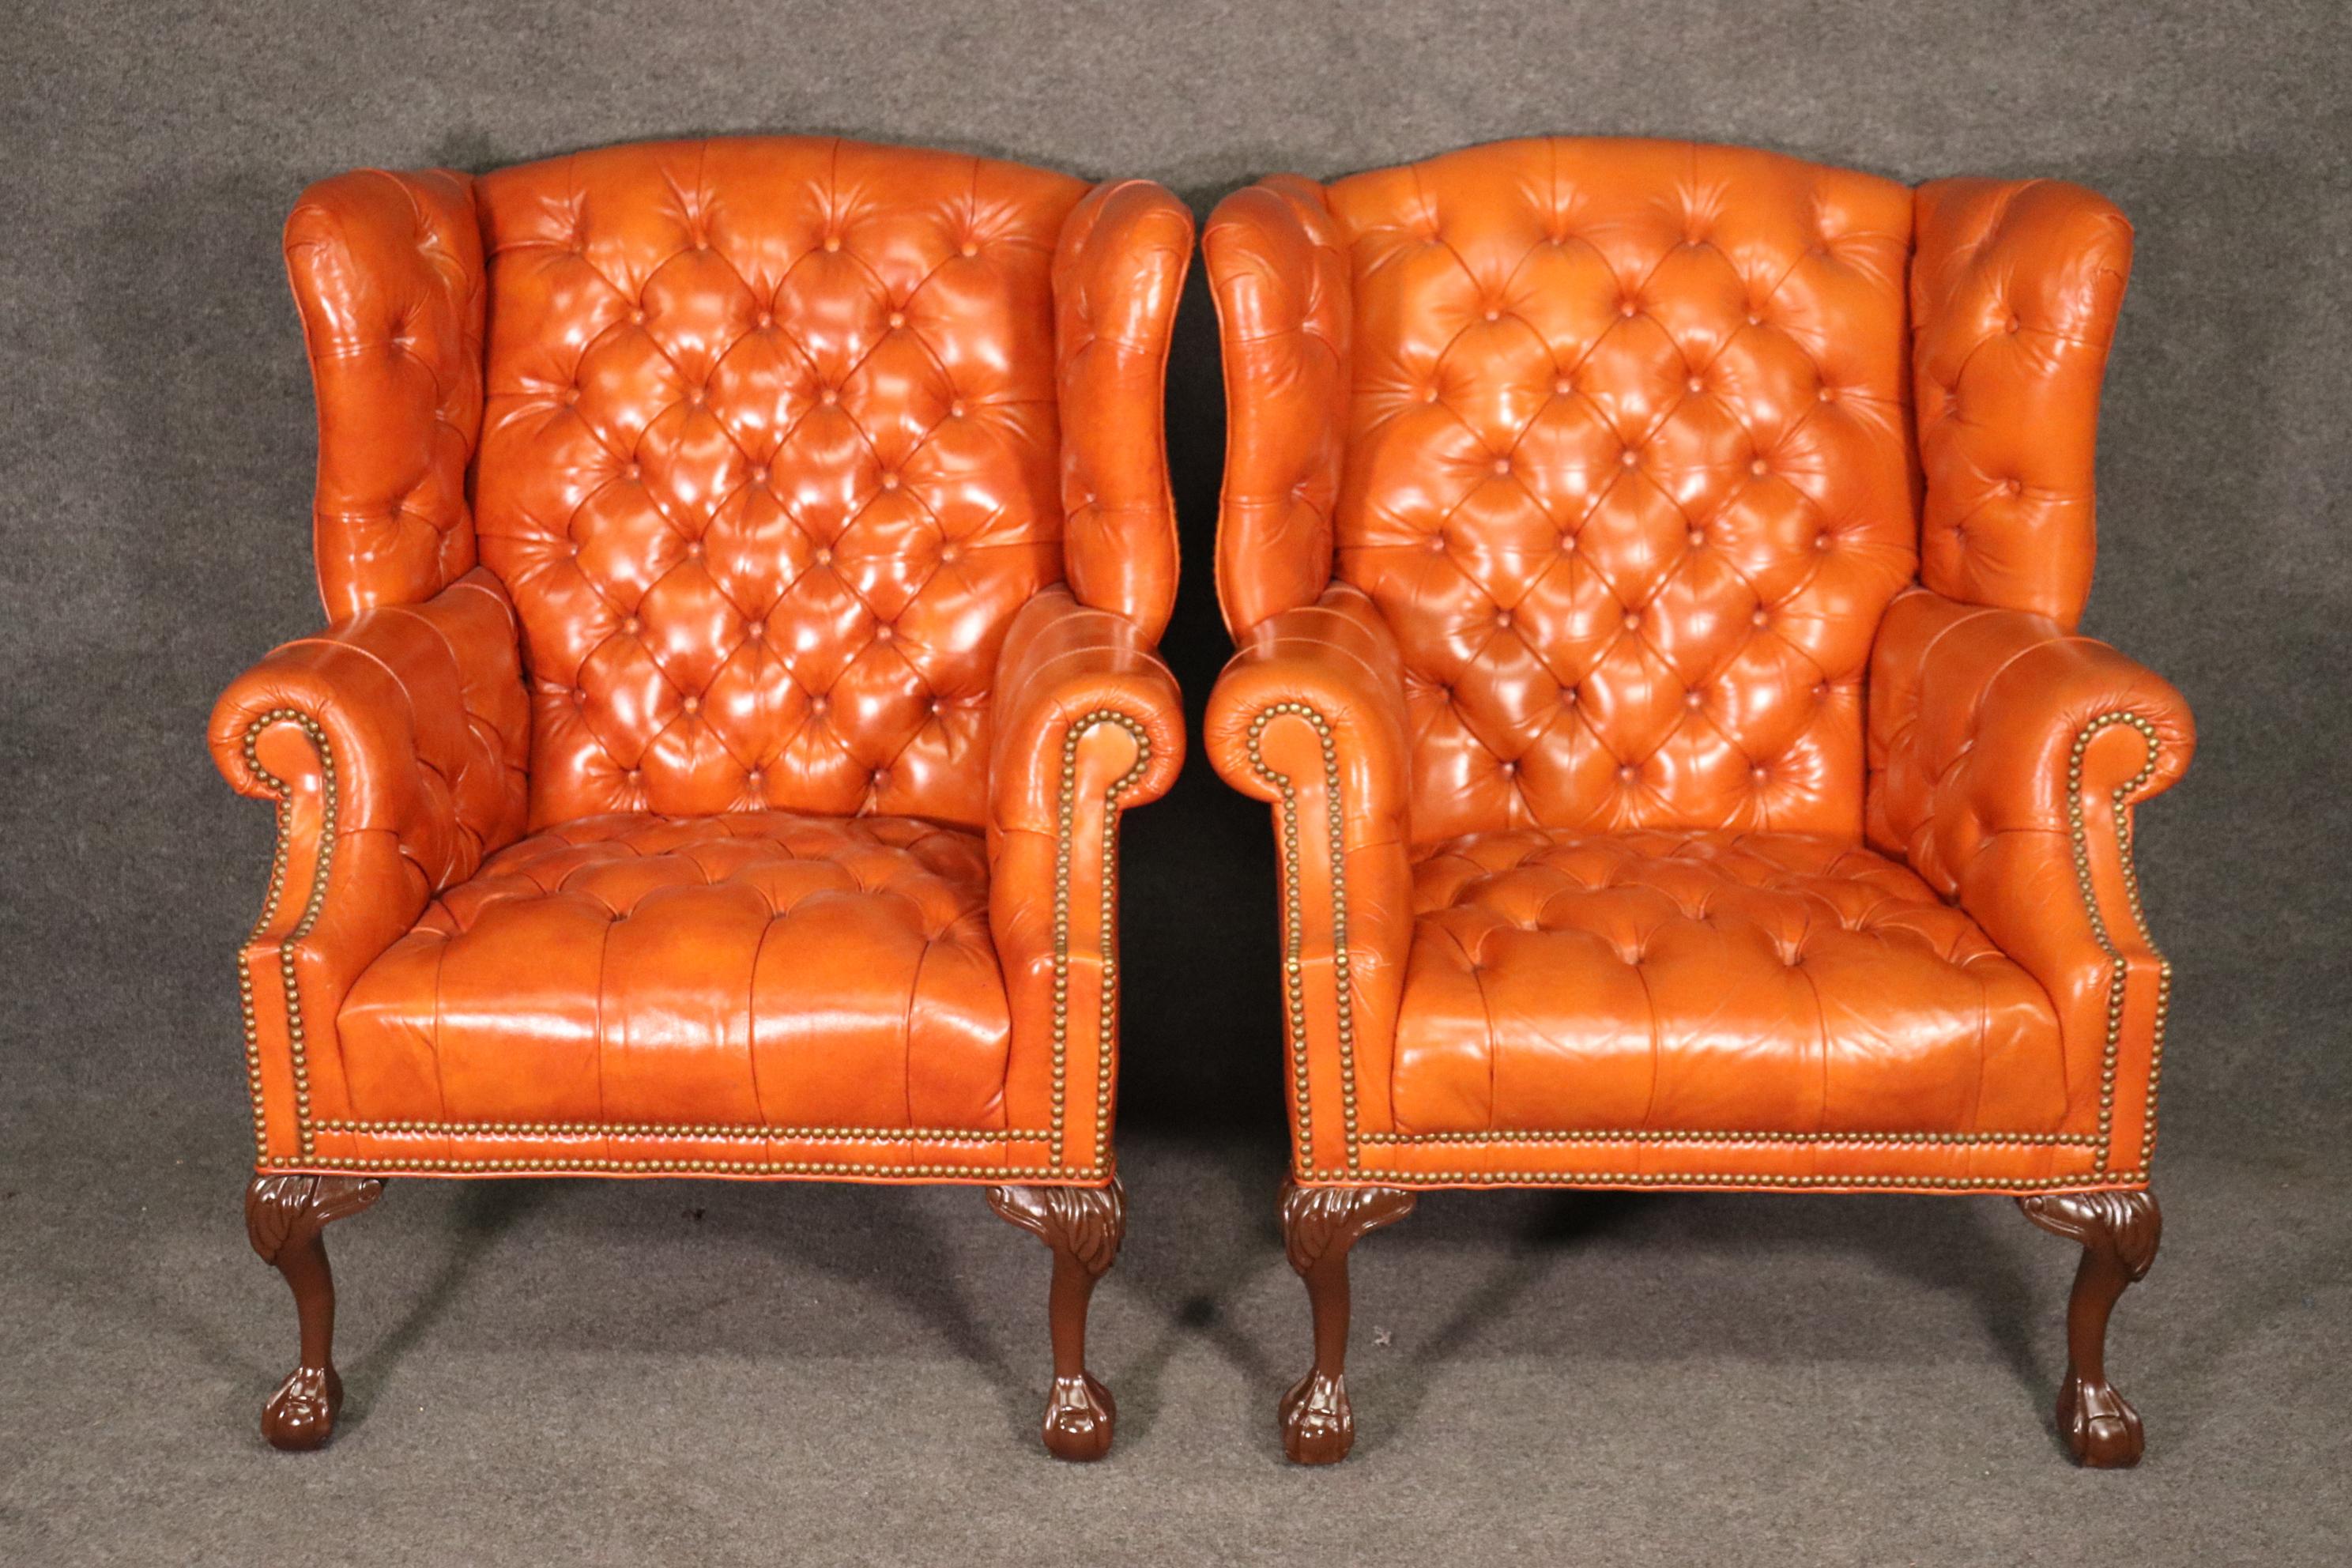 This is a gorgeous set of orange leather wingback chairs with a matching ottoman as well. They are all of generous proportions and in very good antique condition. The chairs measures 42 tall x 34 wide x 36 deep and the stool is 23 wide x 16 tall x